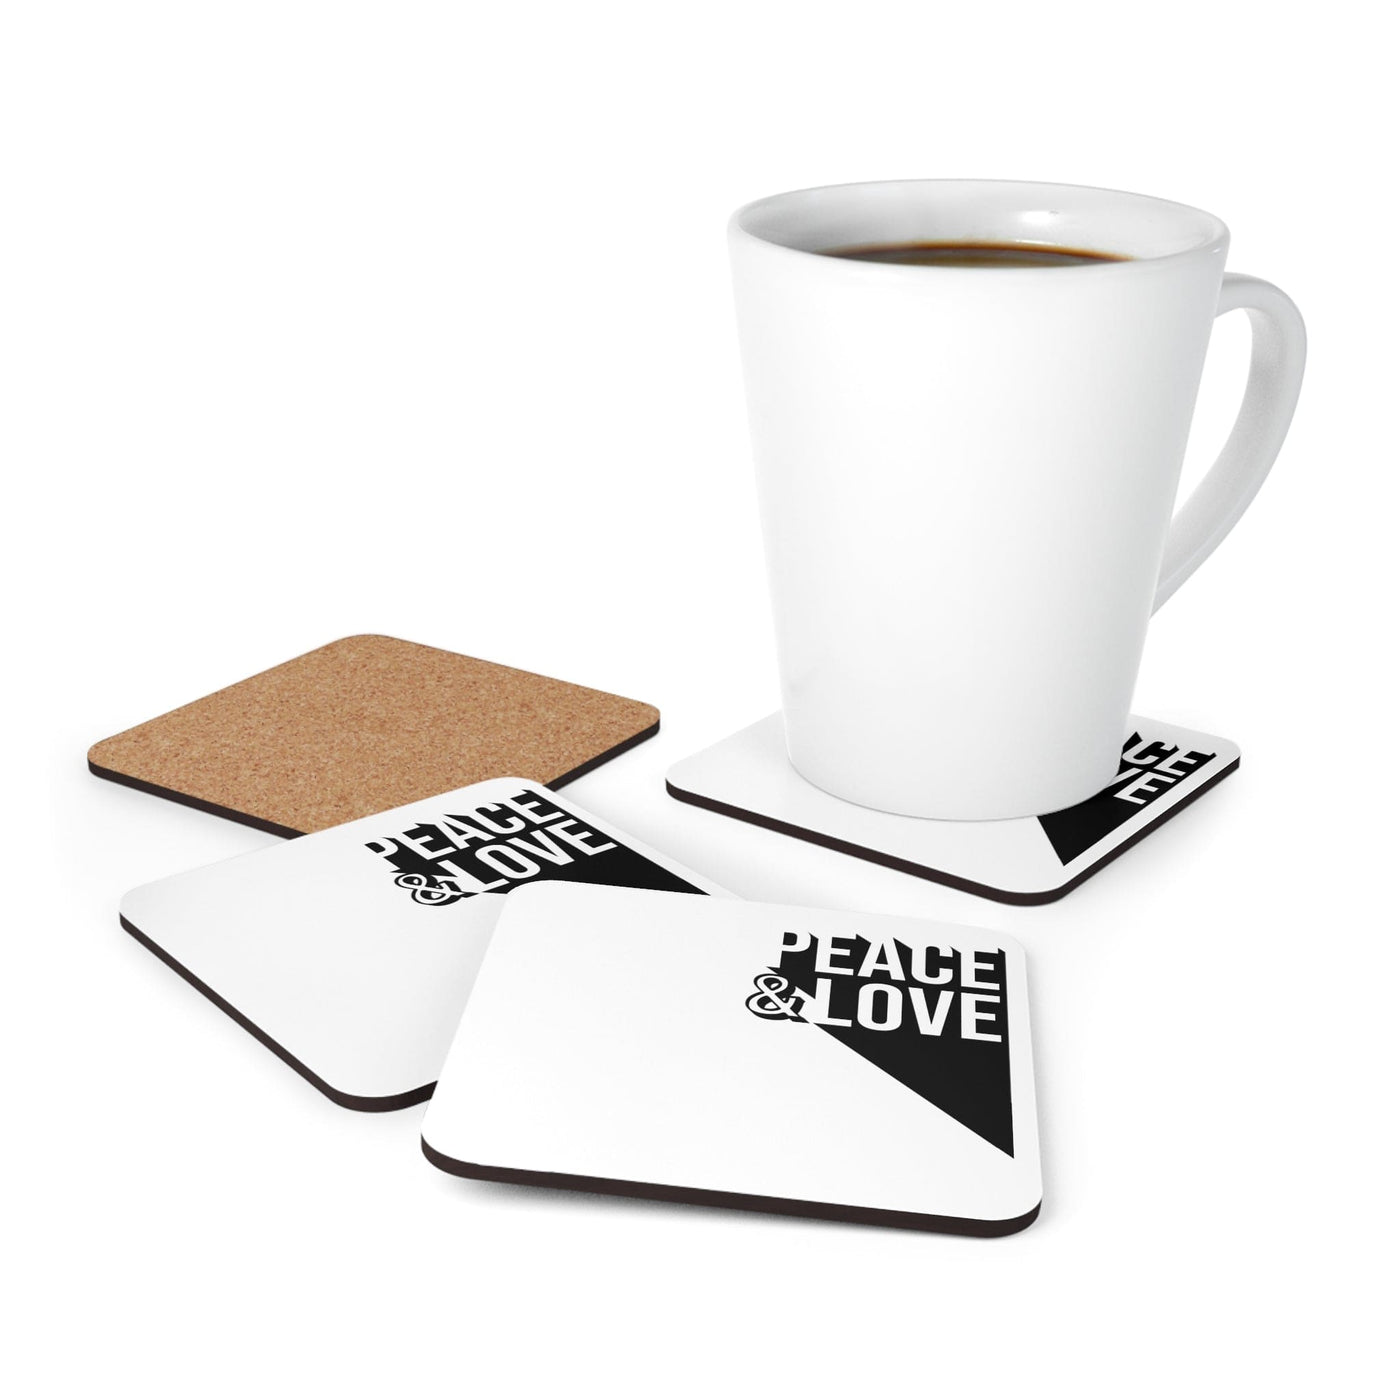 Coaster Set Of 4 For Drinks Peace And Love Print - Decorative | Coasters